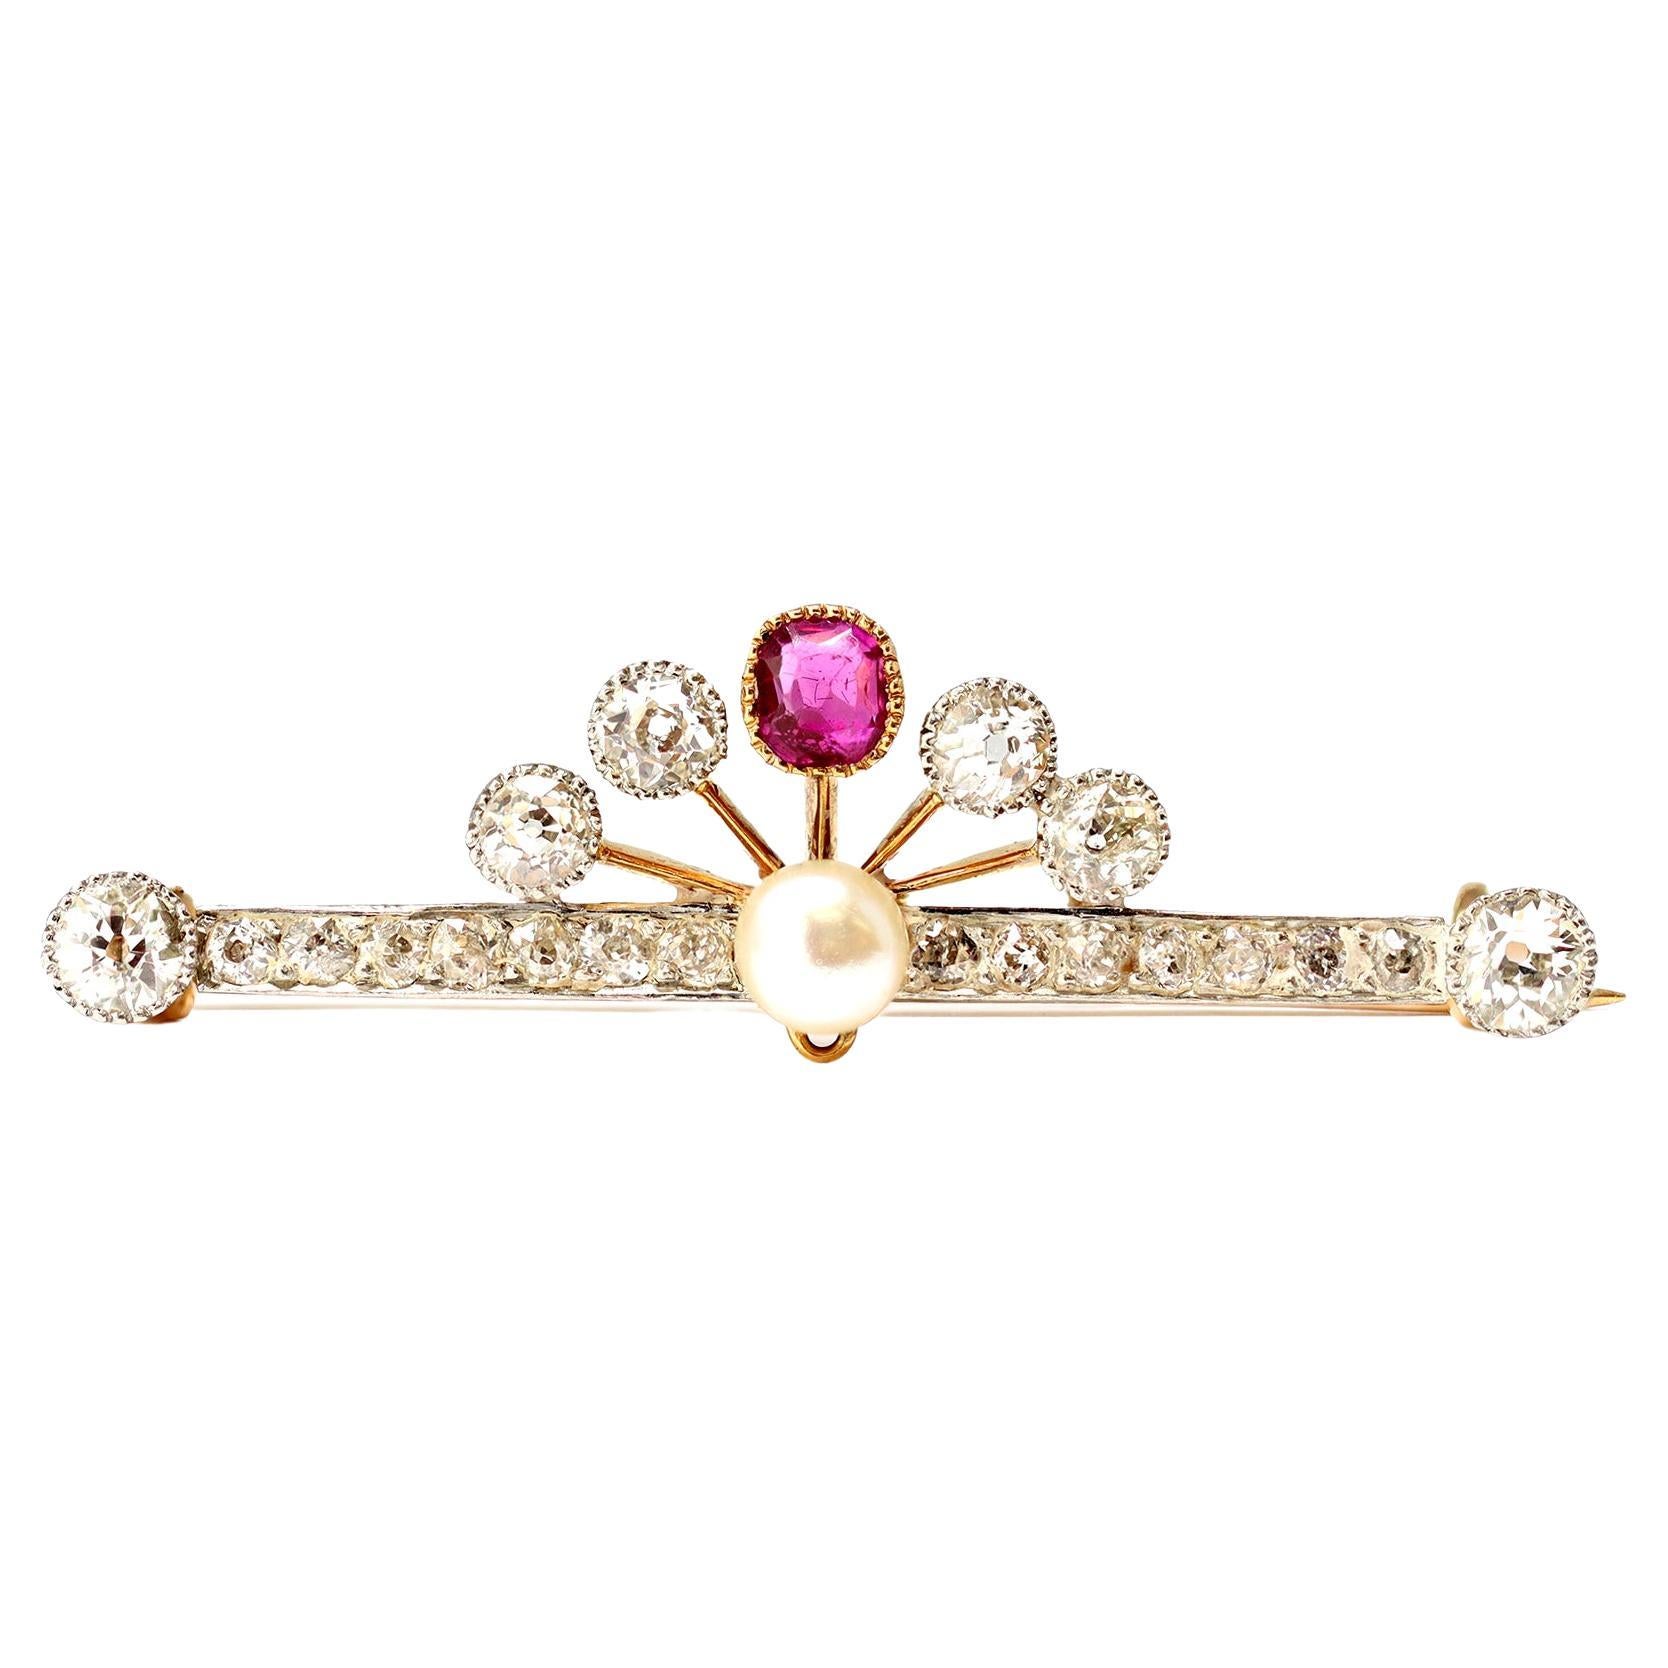 Burma Ruby Diamond and Pearl Brooch in 14 Karat Gold For Sale